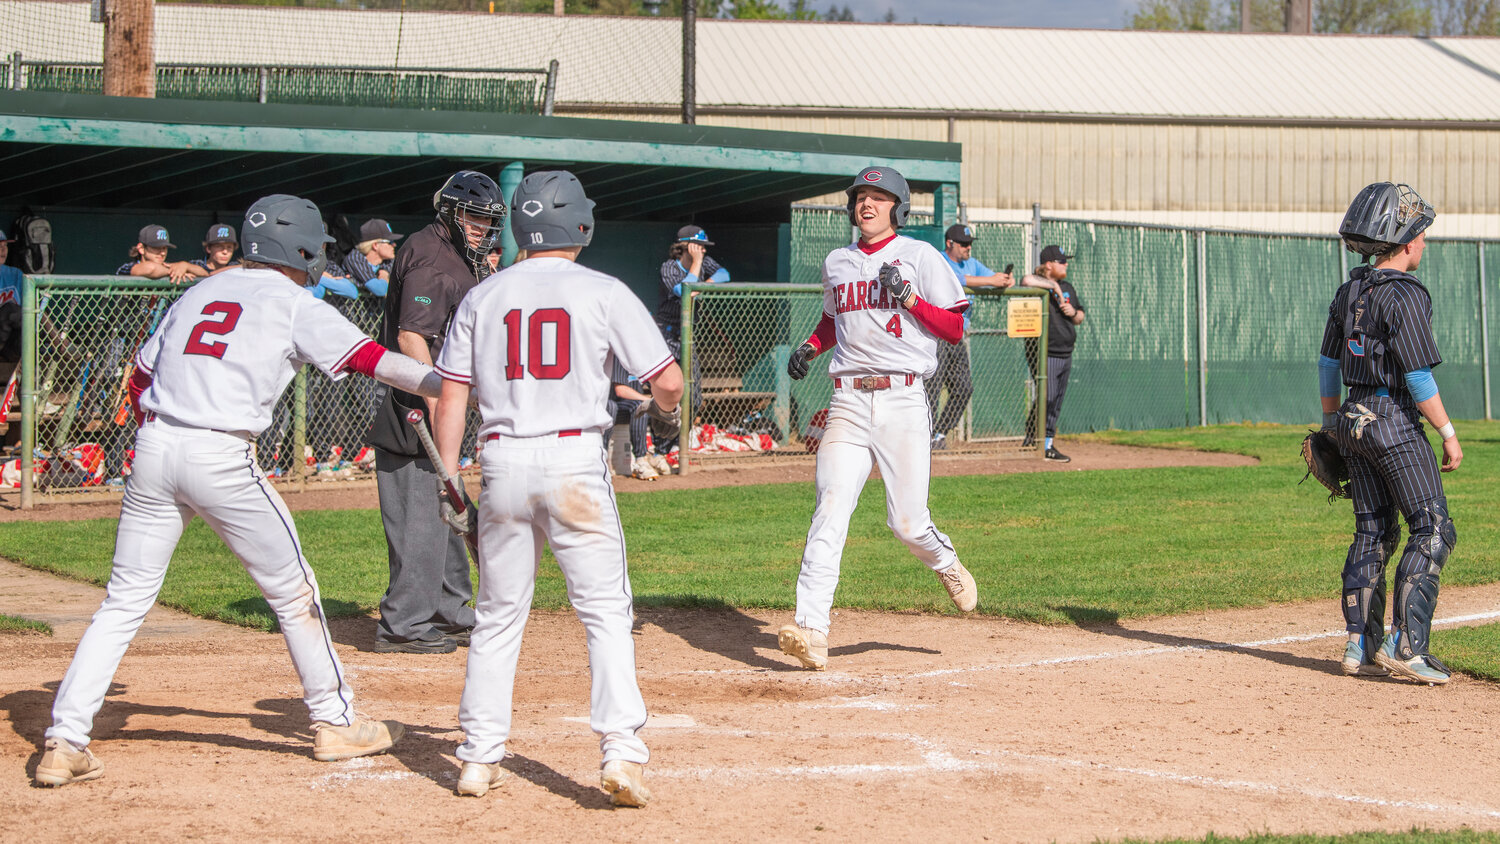 W.F. West’s Weston Potter (4) smiles as he prepares to celebrate with teammates while crossing home plate during a game against Mark Morris at Bearcat Stadium in Chehalis on Tuesday, May 9.